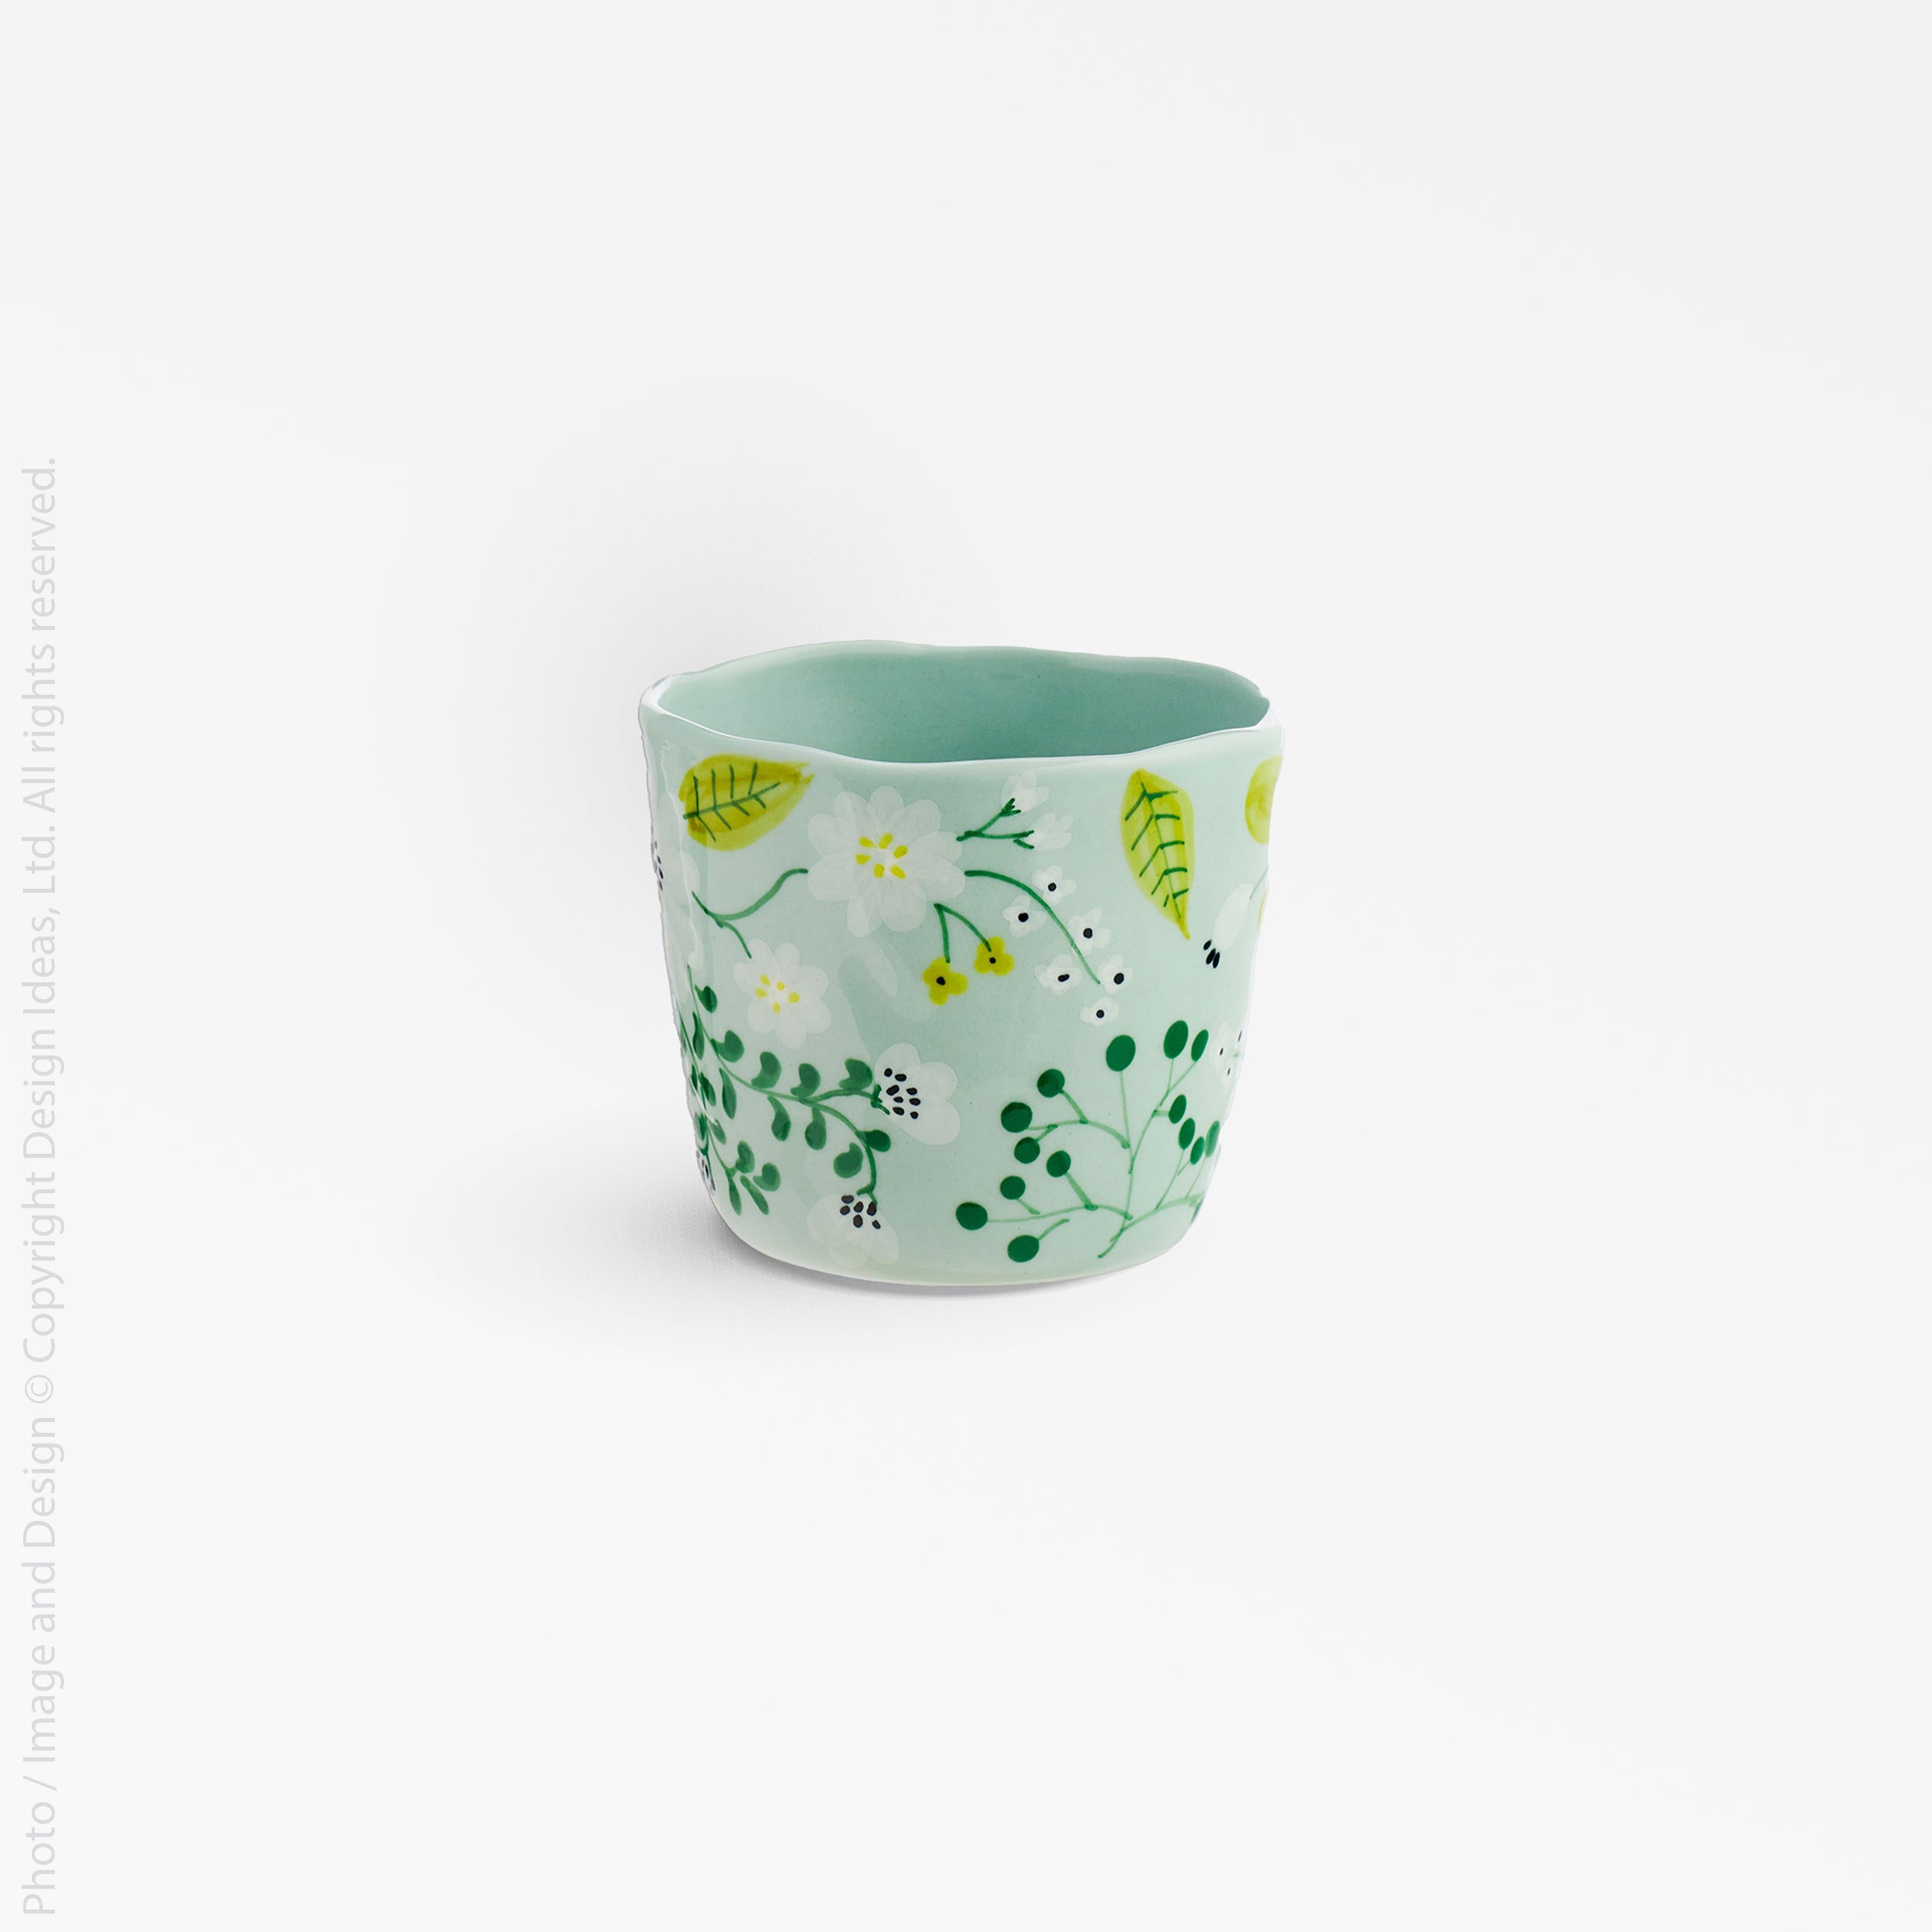 Bloomsbury™ teacup (4 oz.) - Mint | Image 1 | Premium Cup from the Bloomsbury collection | made with Kaolin clay for long lasting use | texxture